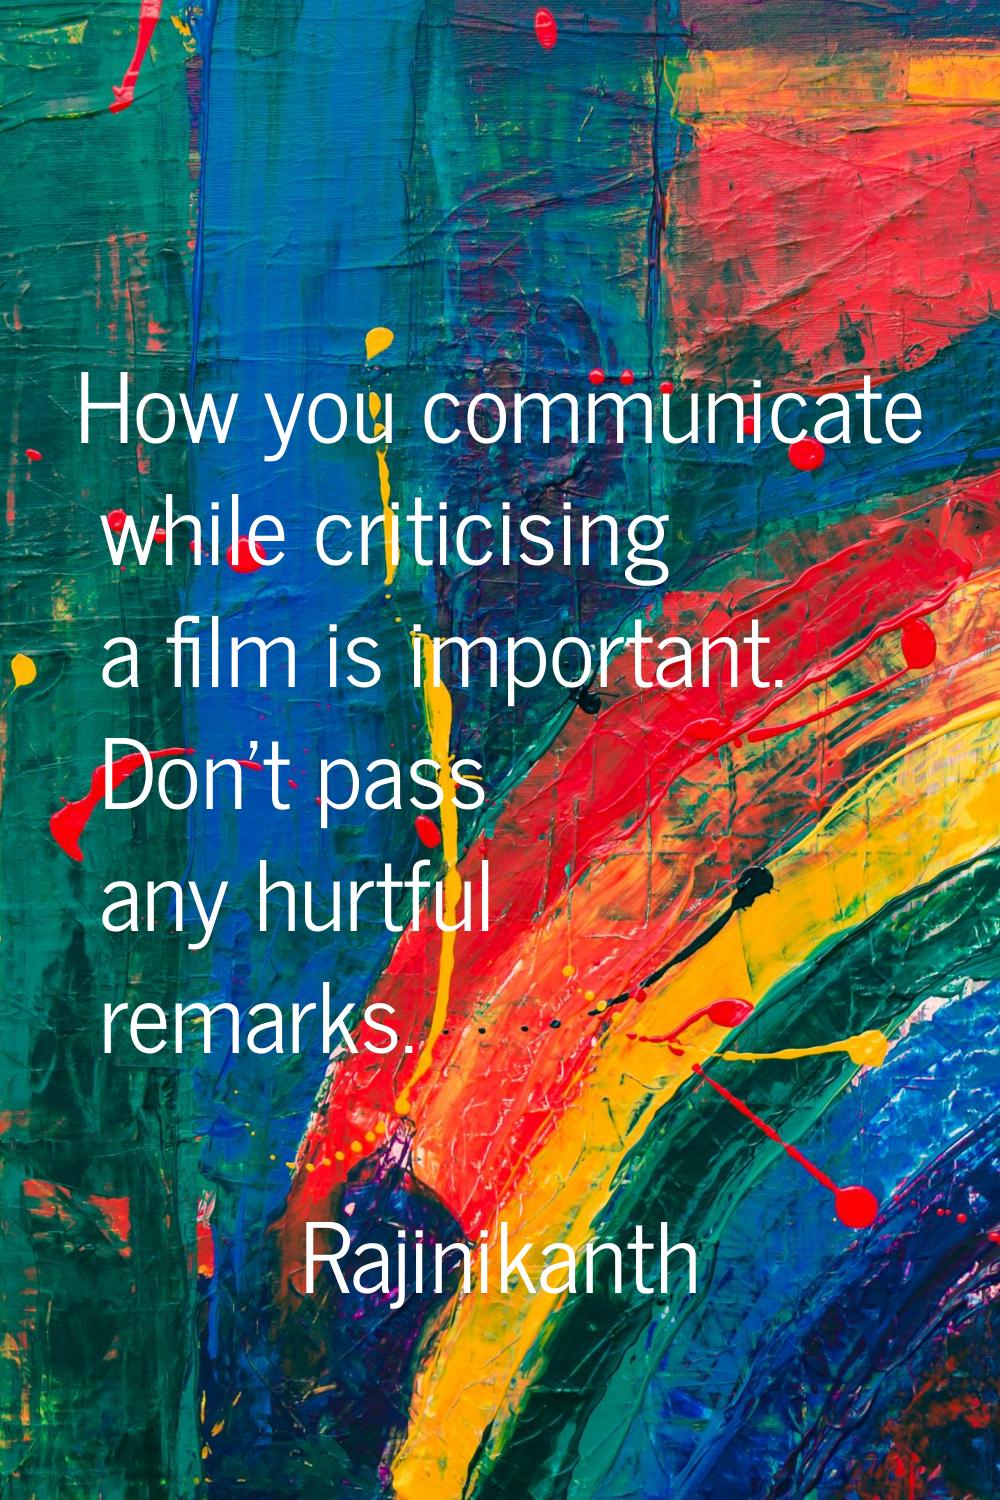 How you communicate while criticising a film is important. Don't pass any hurtful remarks.